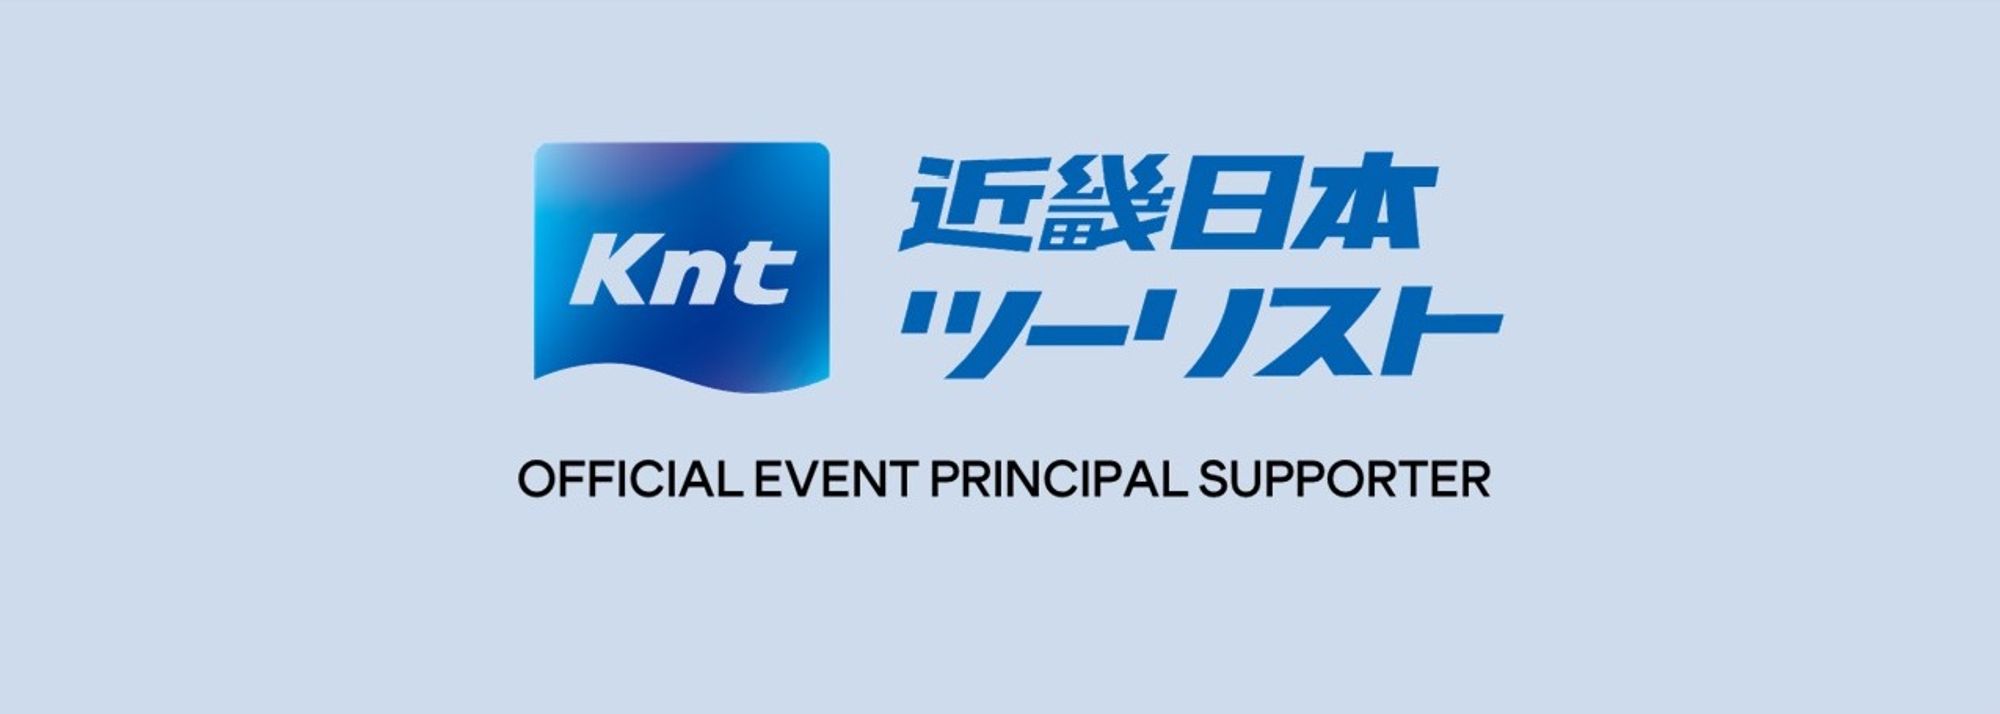 Kinki Nippon Tourist Co., Ltd. has been announced today as an Official Event Principal Supporter